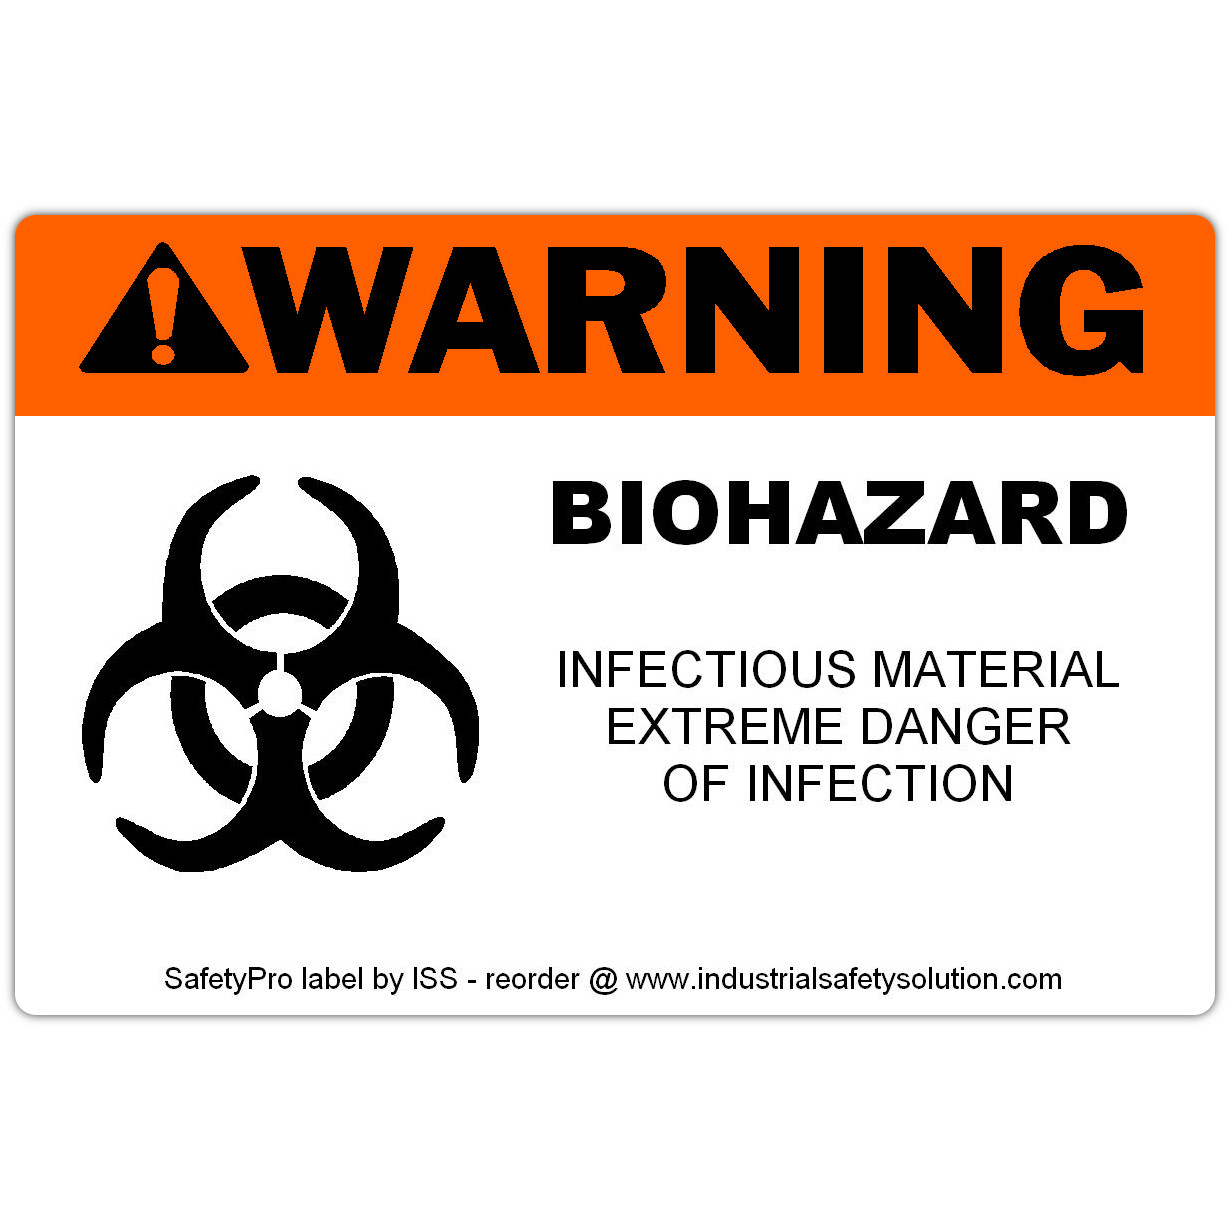 Detail view for 4" x 6" WARNING Biohazard Safety Label